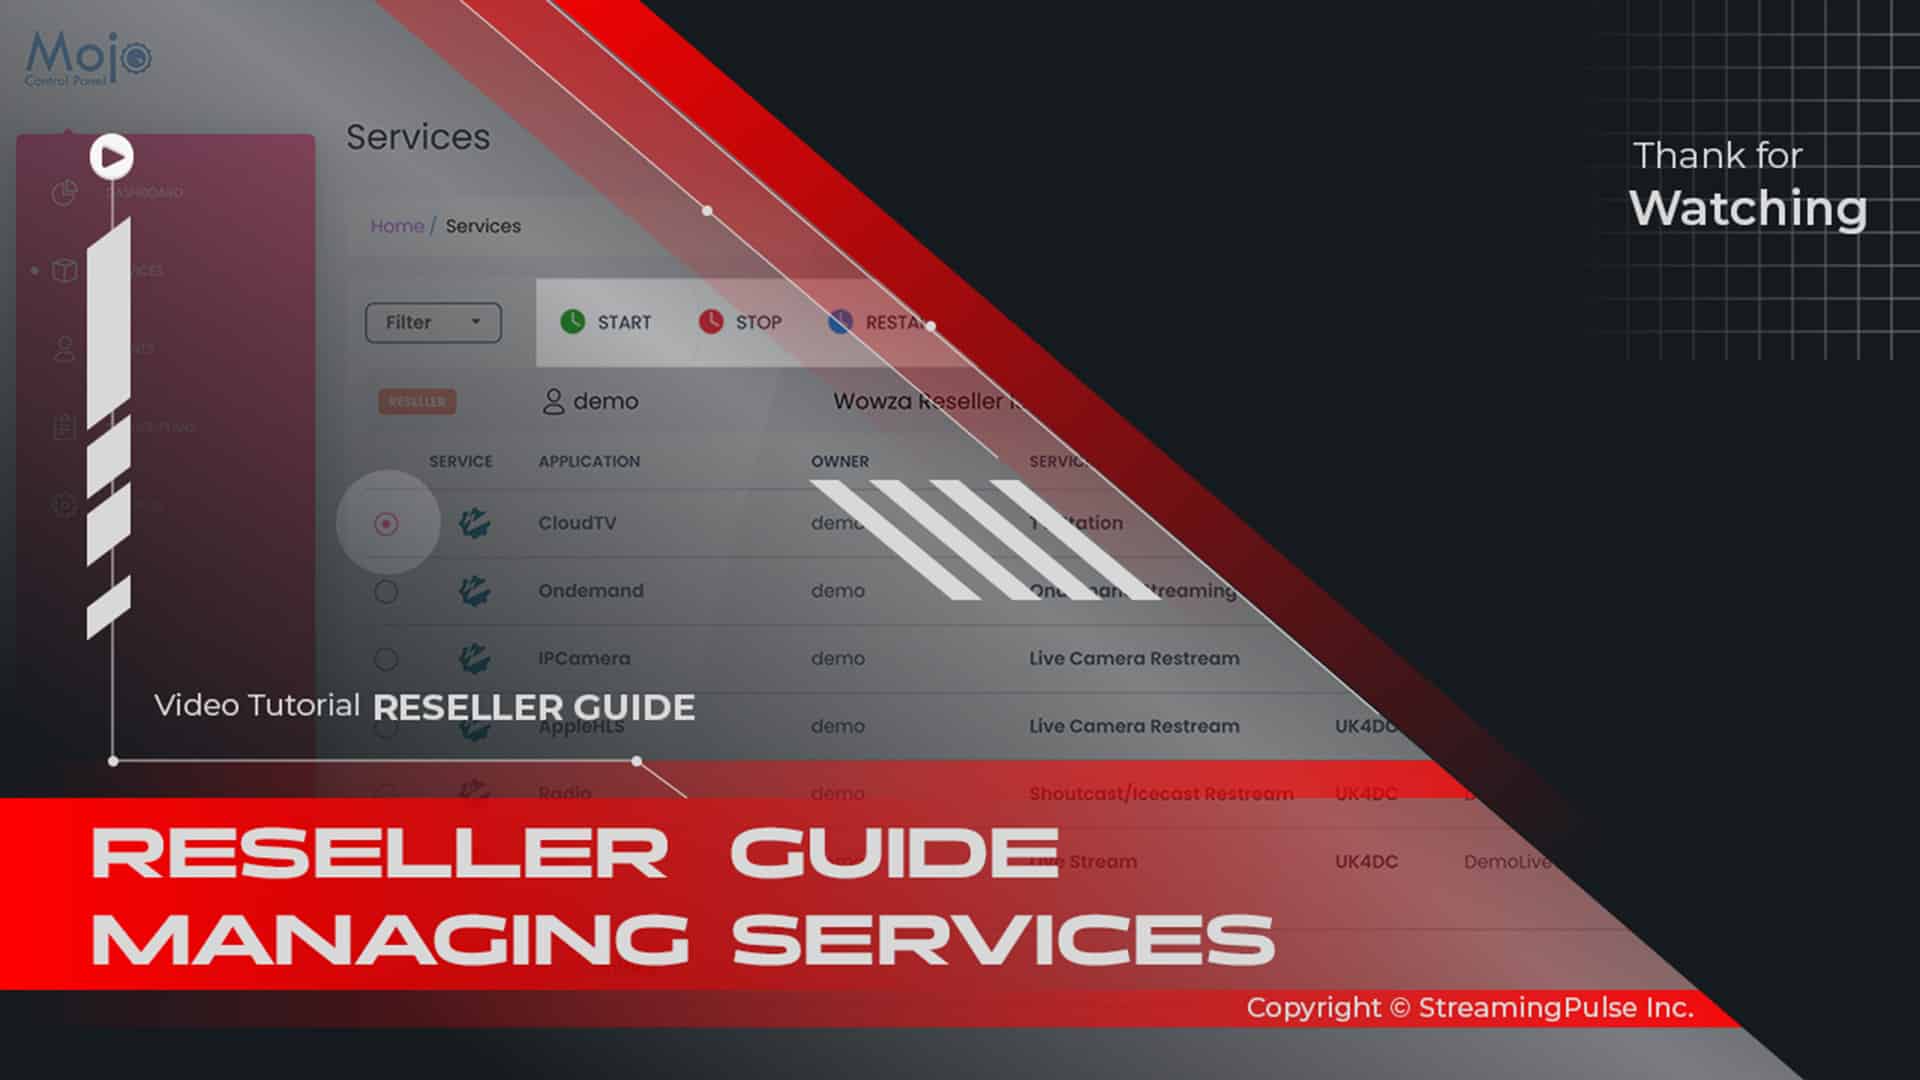 MojoCP Reseller Guide Managing Services